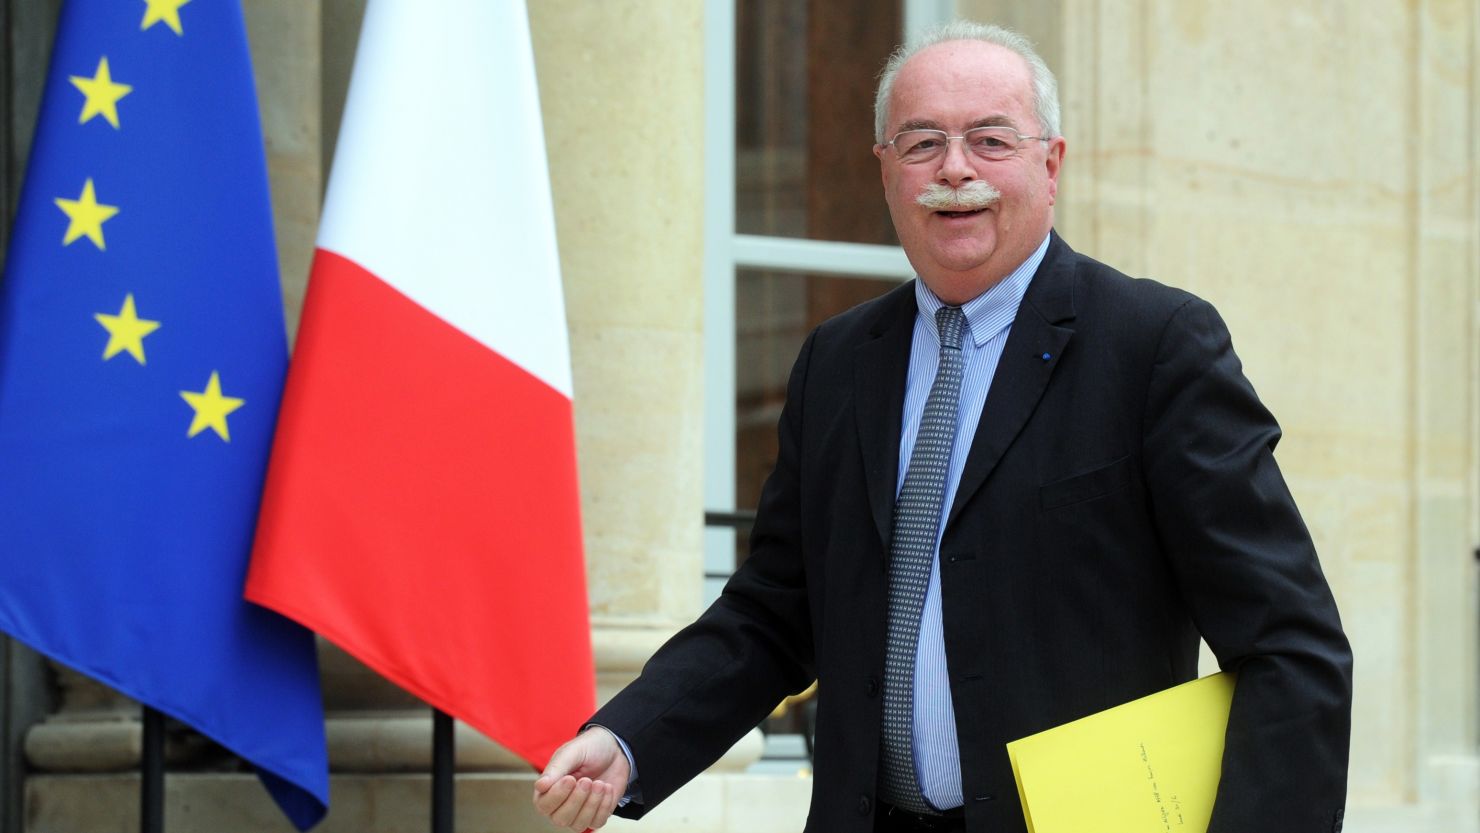 Christophe de Margerie, CEO of French oil and gas company Total, arrives for a meeting at the Elysee Palace in Paris on June 30, 2014.